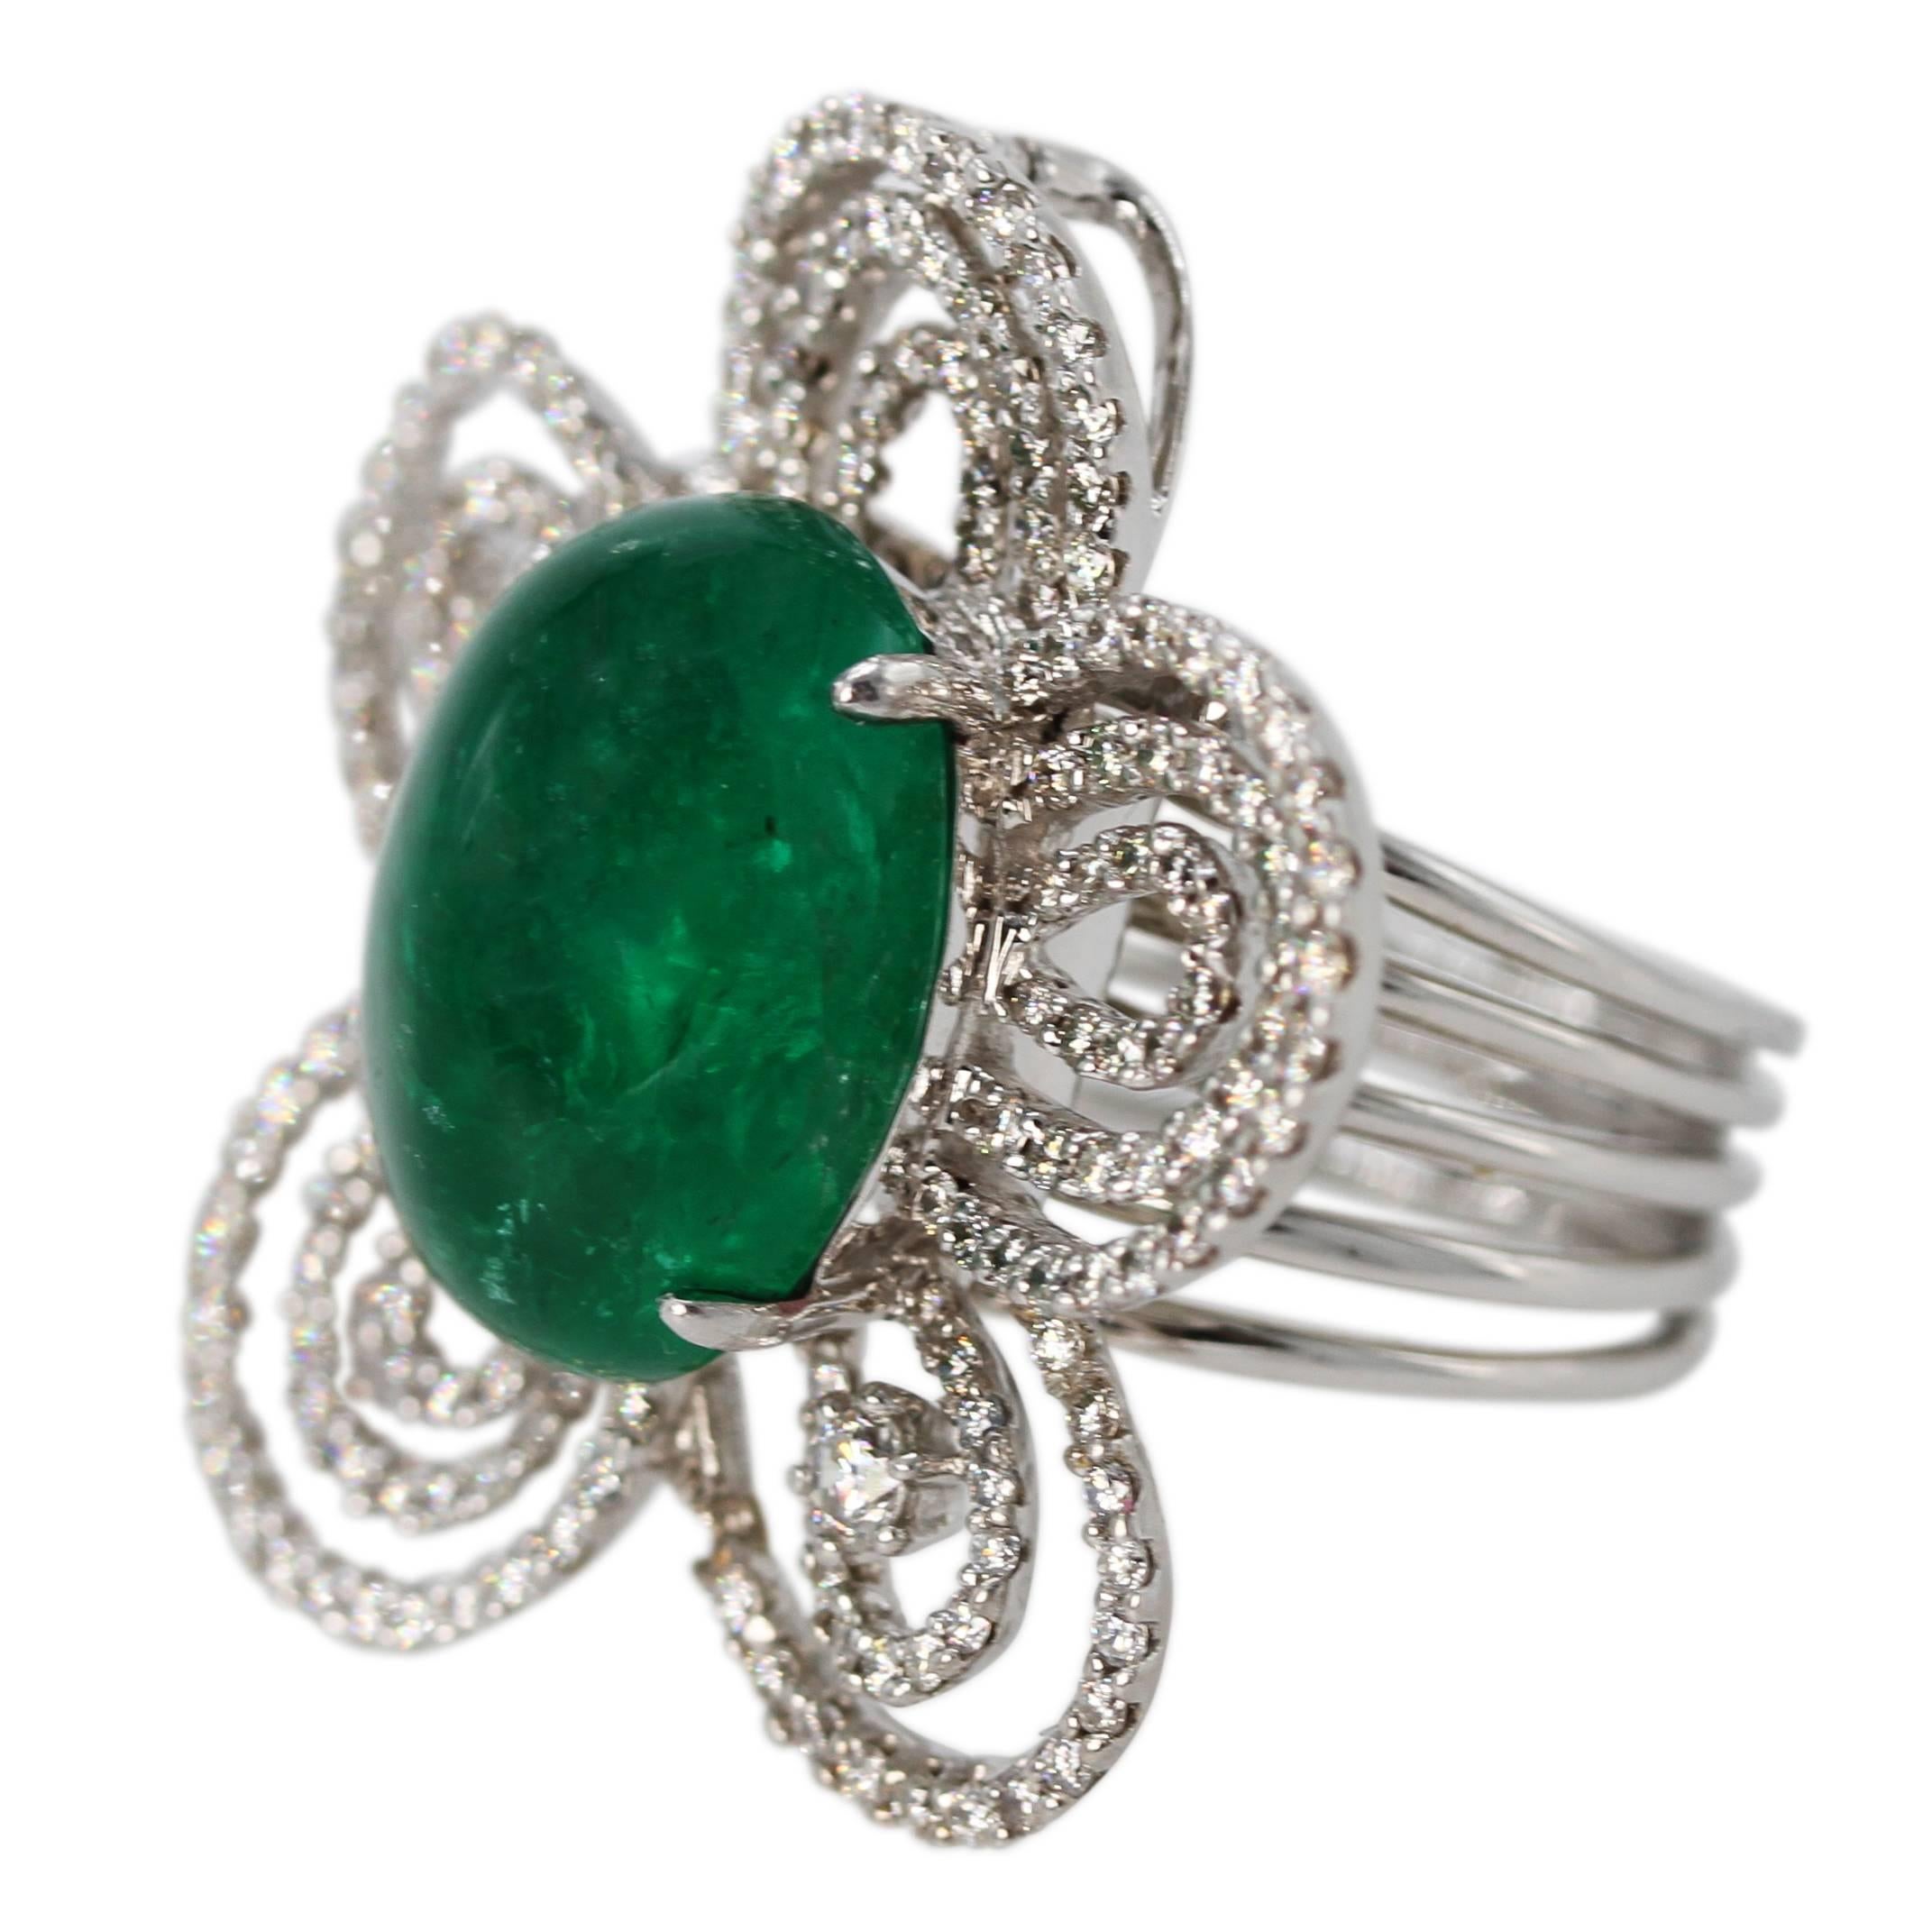 18 Karat White Gold, Emerald and Diamond Convertible Ring/Pendant
• Marked 18k D184 E1451, with makers mark
• Center oval cabochon emerald weighing 14.51 carats
• 186 round diamonds weighing 1.84 carats
• Top measures 1 3/8 by 1 1/4 inches
• Size 7,